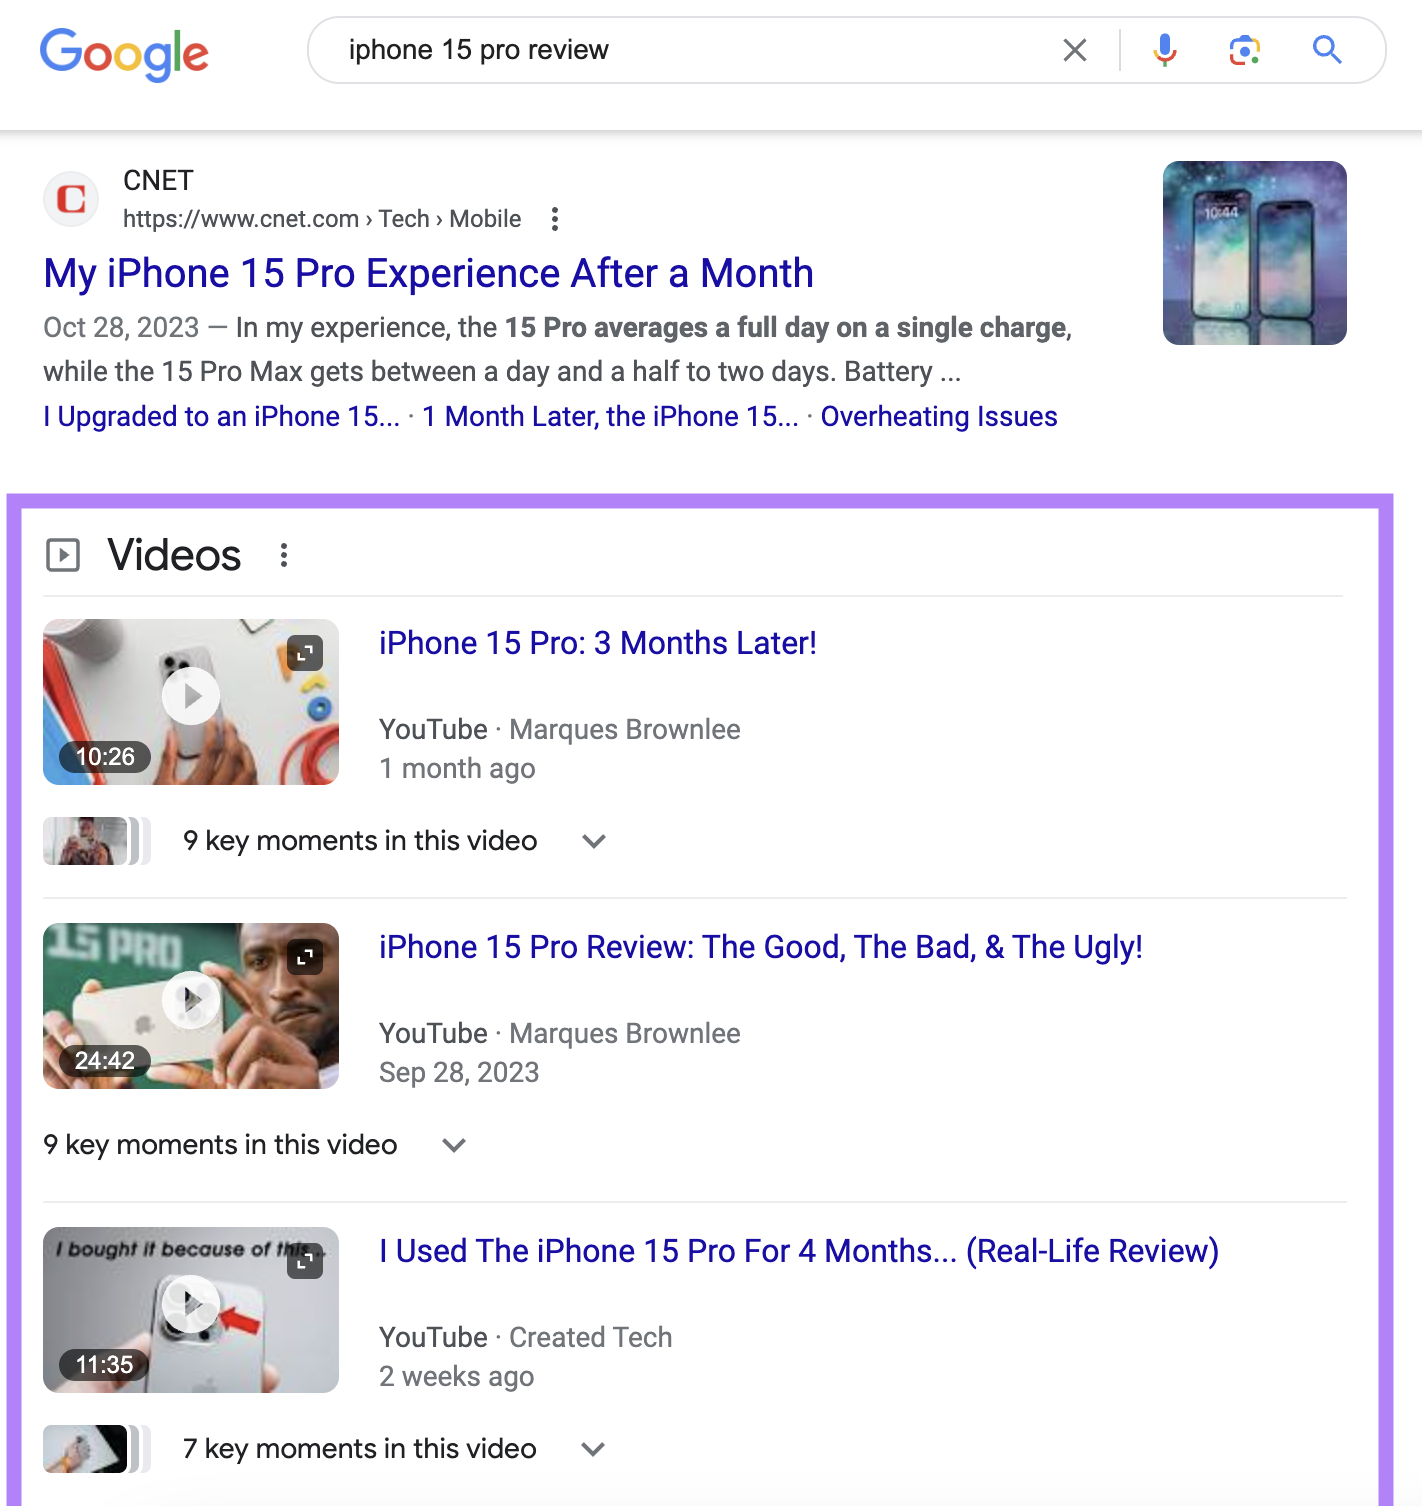 "Videos" results on Google SERP for "iphone 15 pro review" query